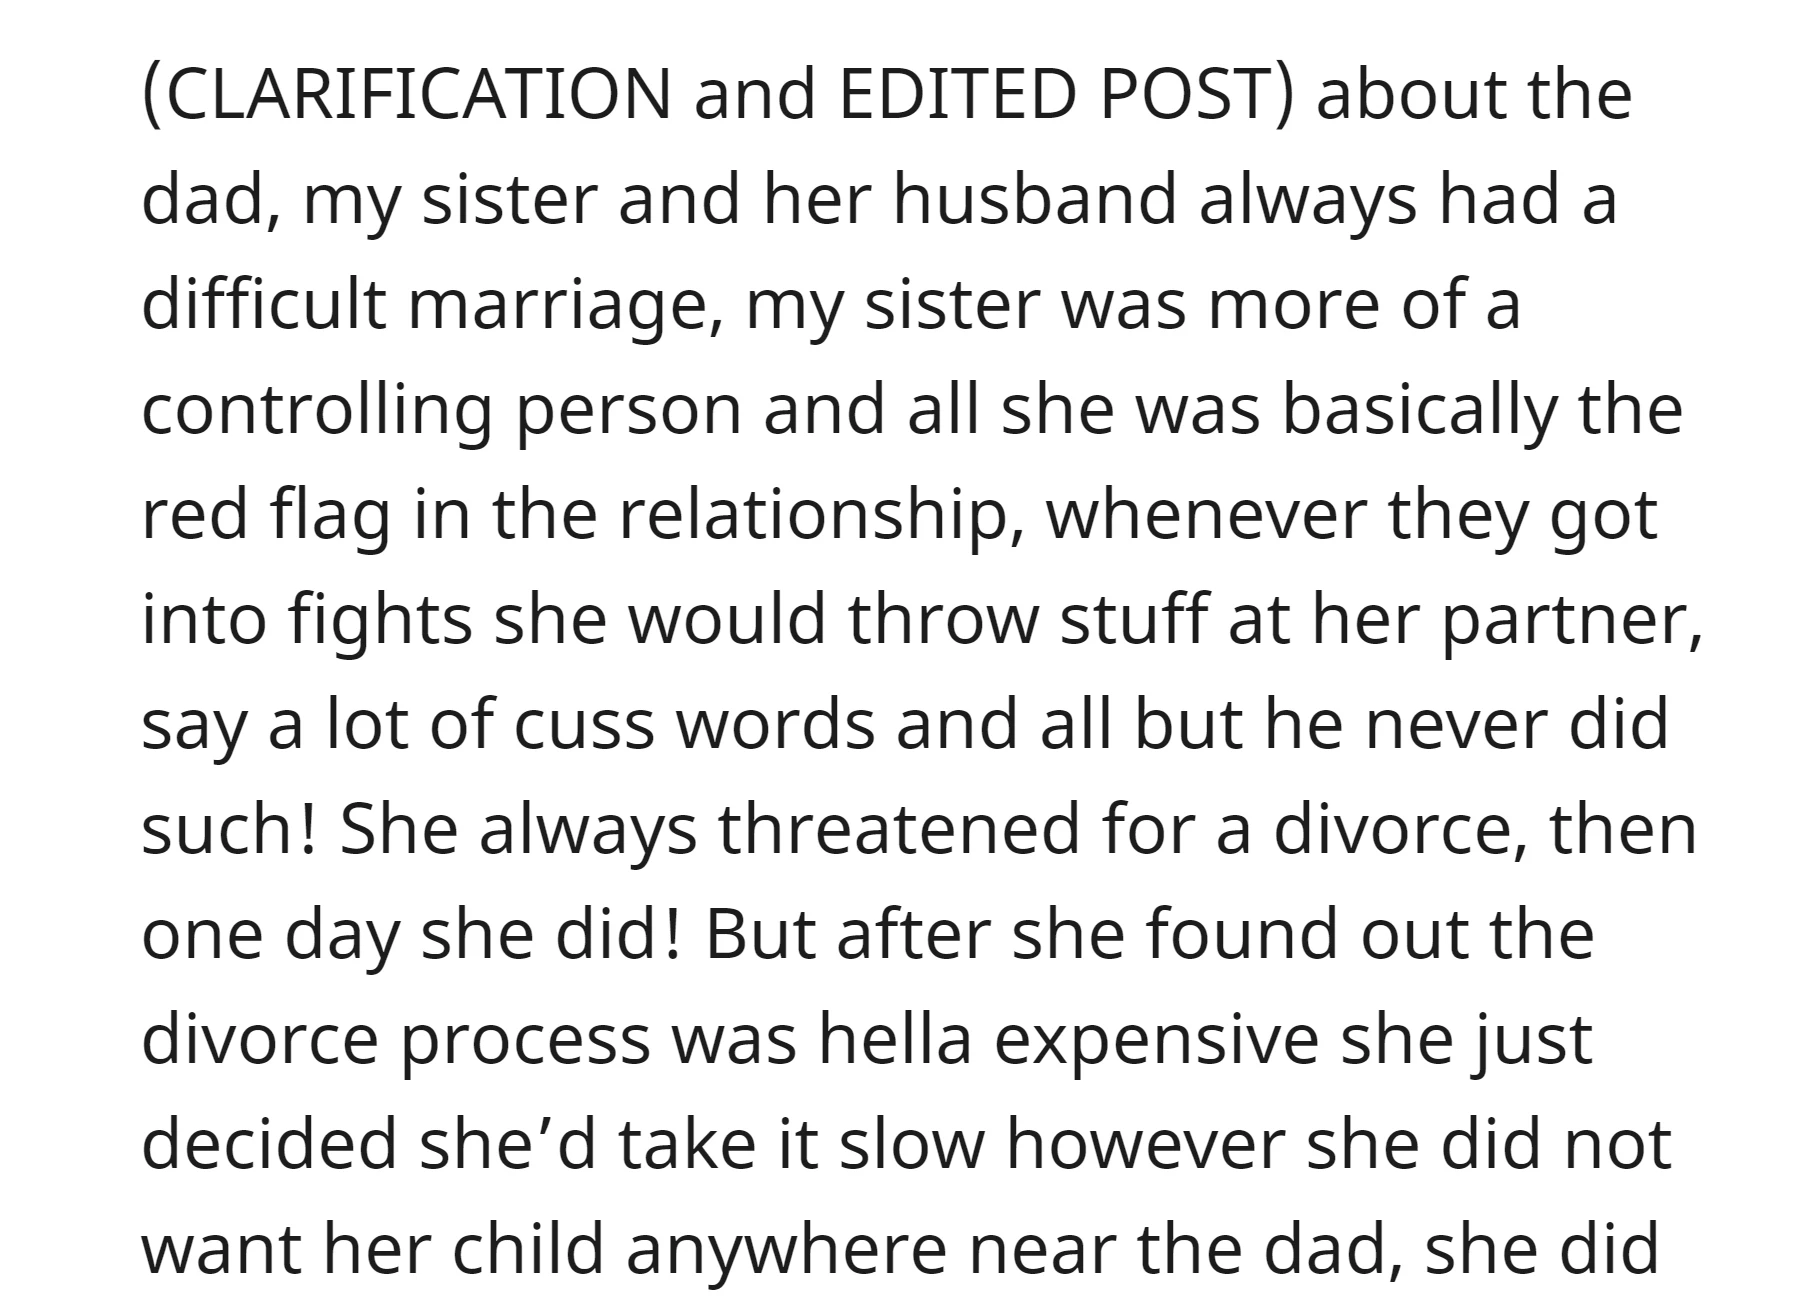 OP's sister had a turbulent marriage with her husband